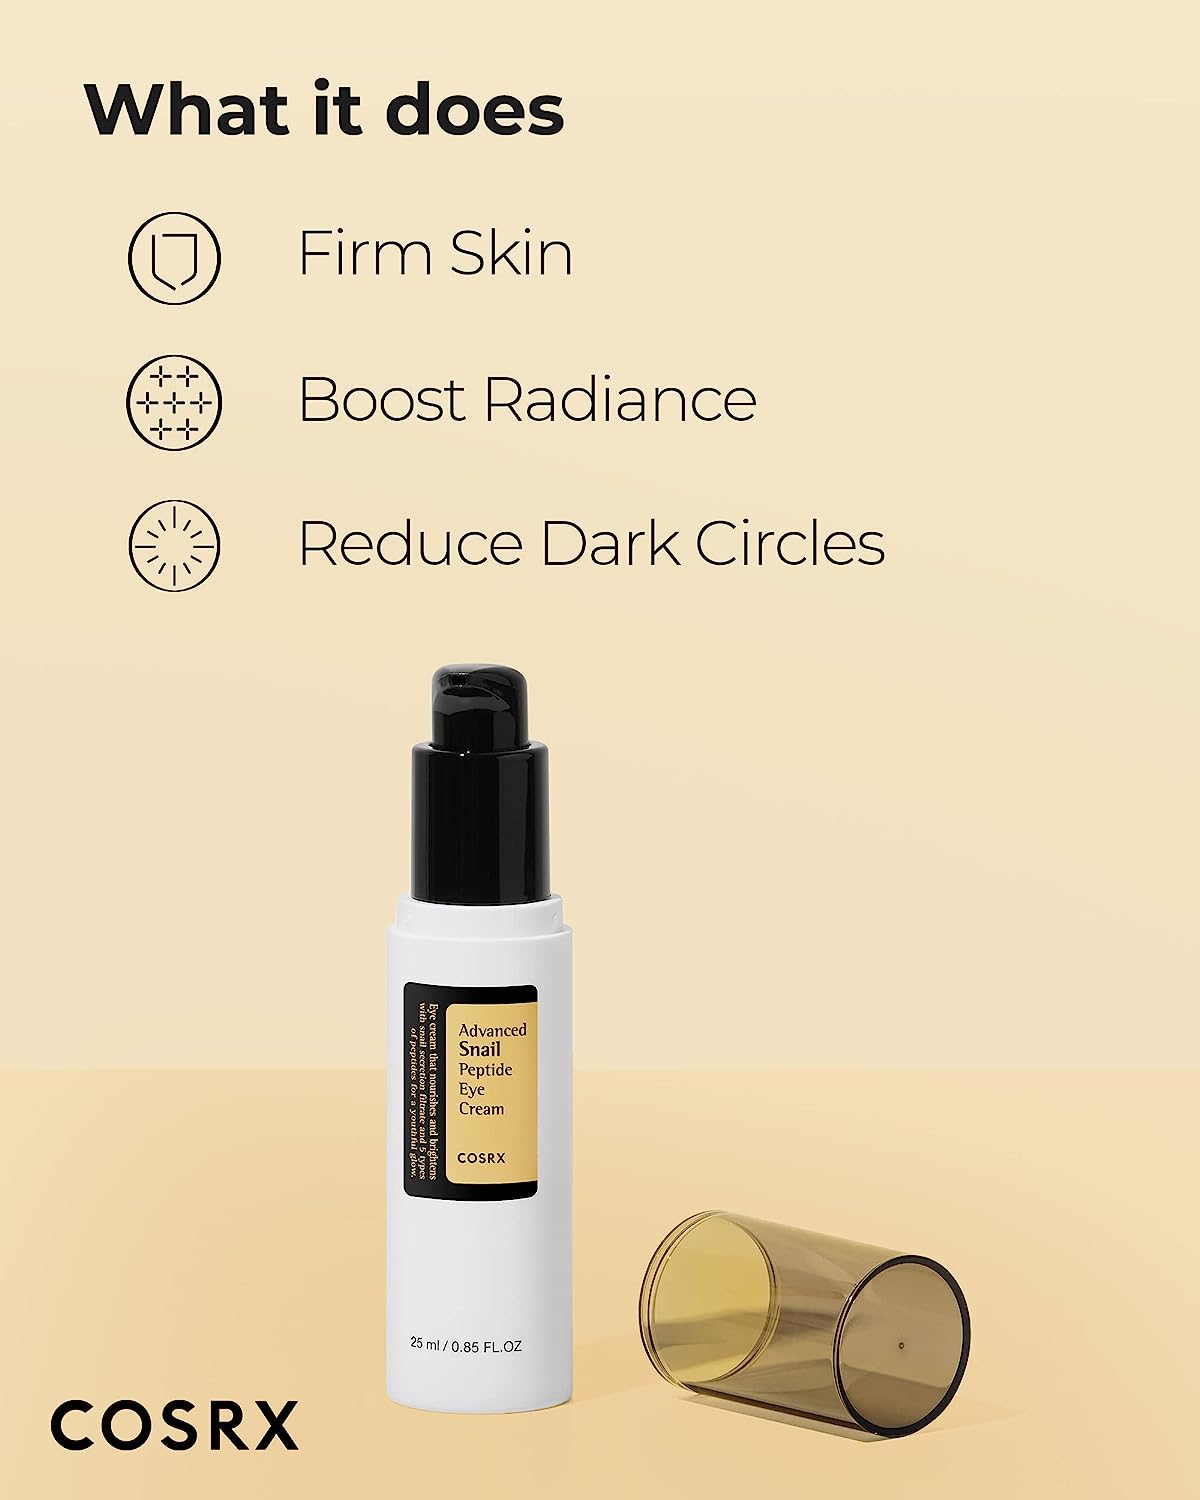 Snail Peptide Eye Cream with 73.7% Snail Mucin and Niacinamide - Brightening Korean Night Cream for Fine Lines and Dark Circles